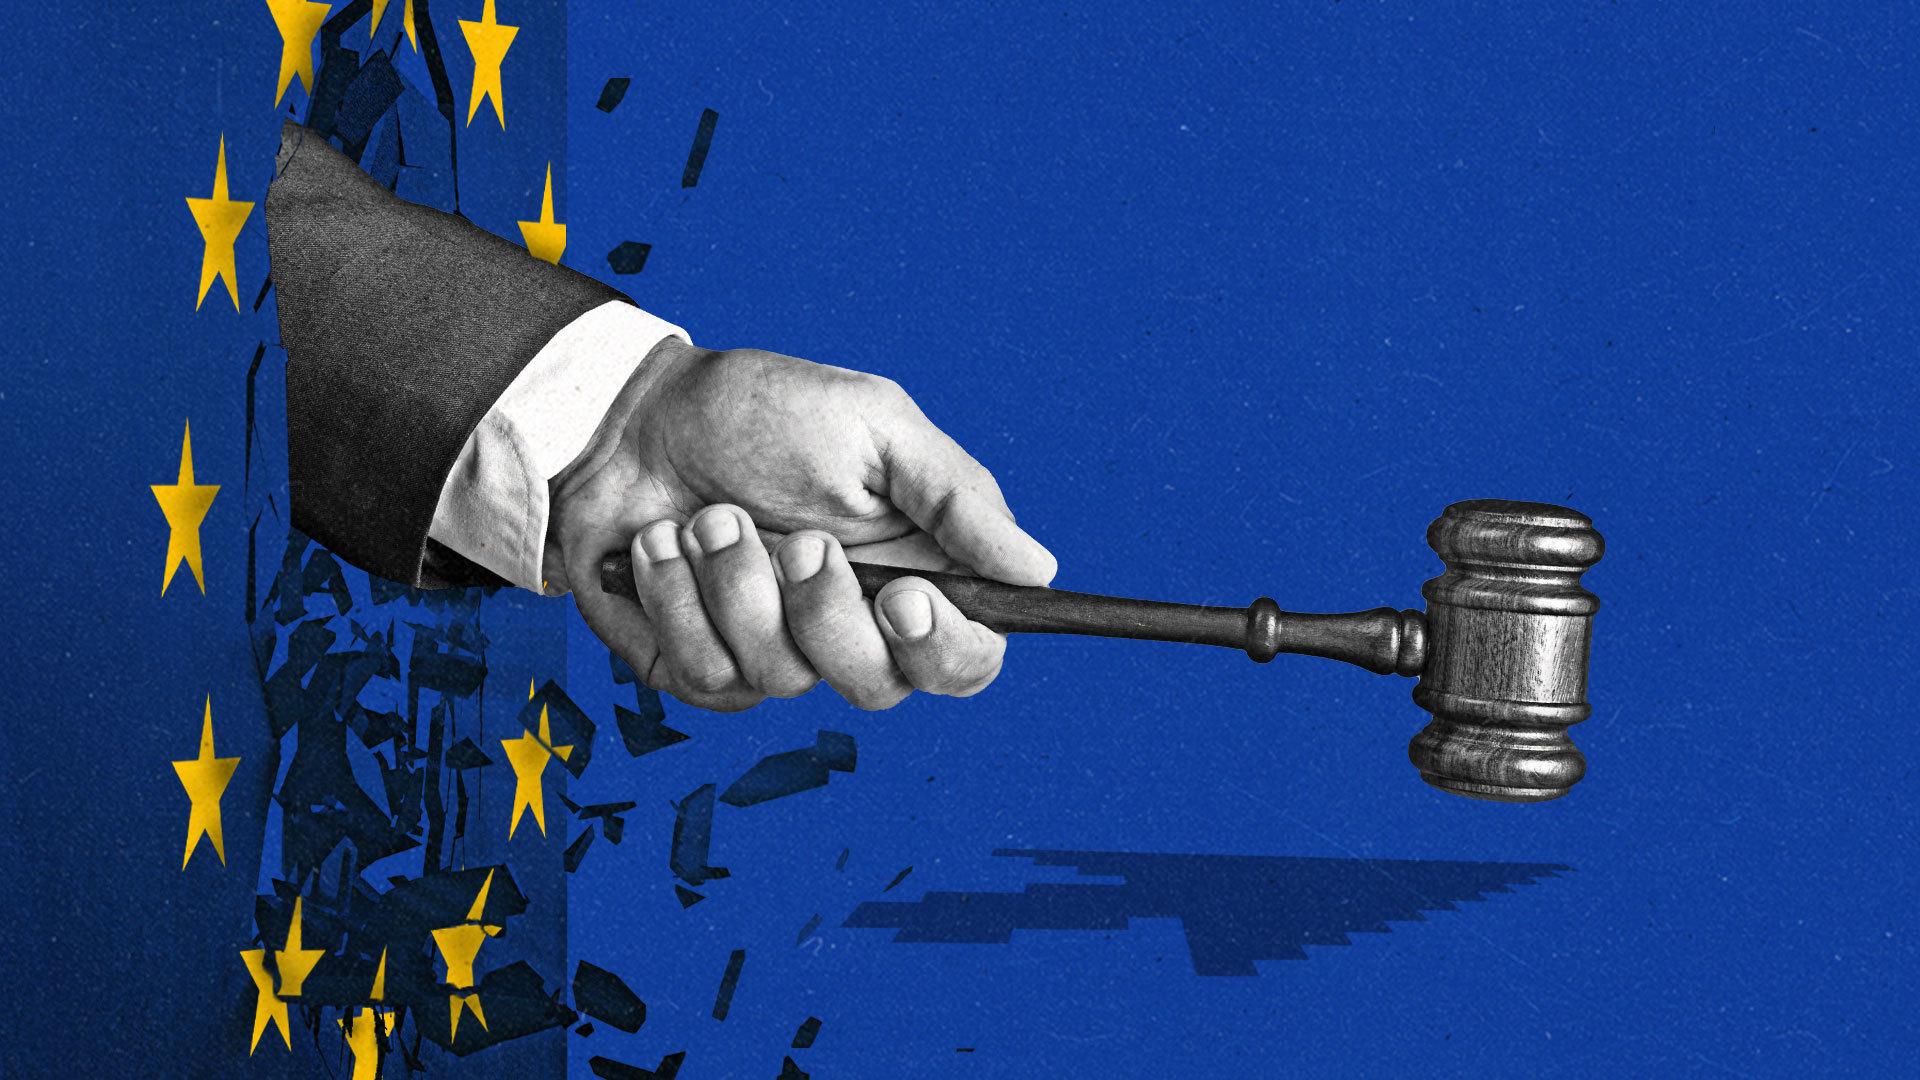 A hand holding a gavel smashes through a wall with the European Union flag printed on it. The shadow of the gavel forms the shape of an arrow cursor.